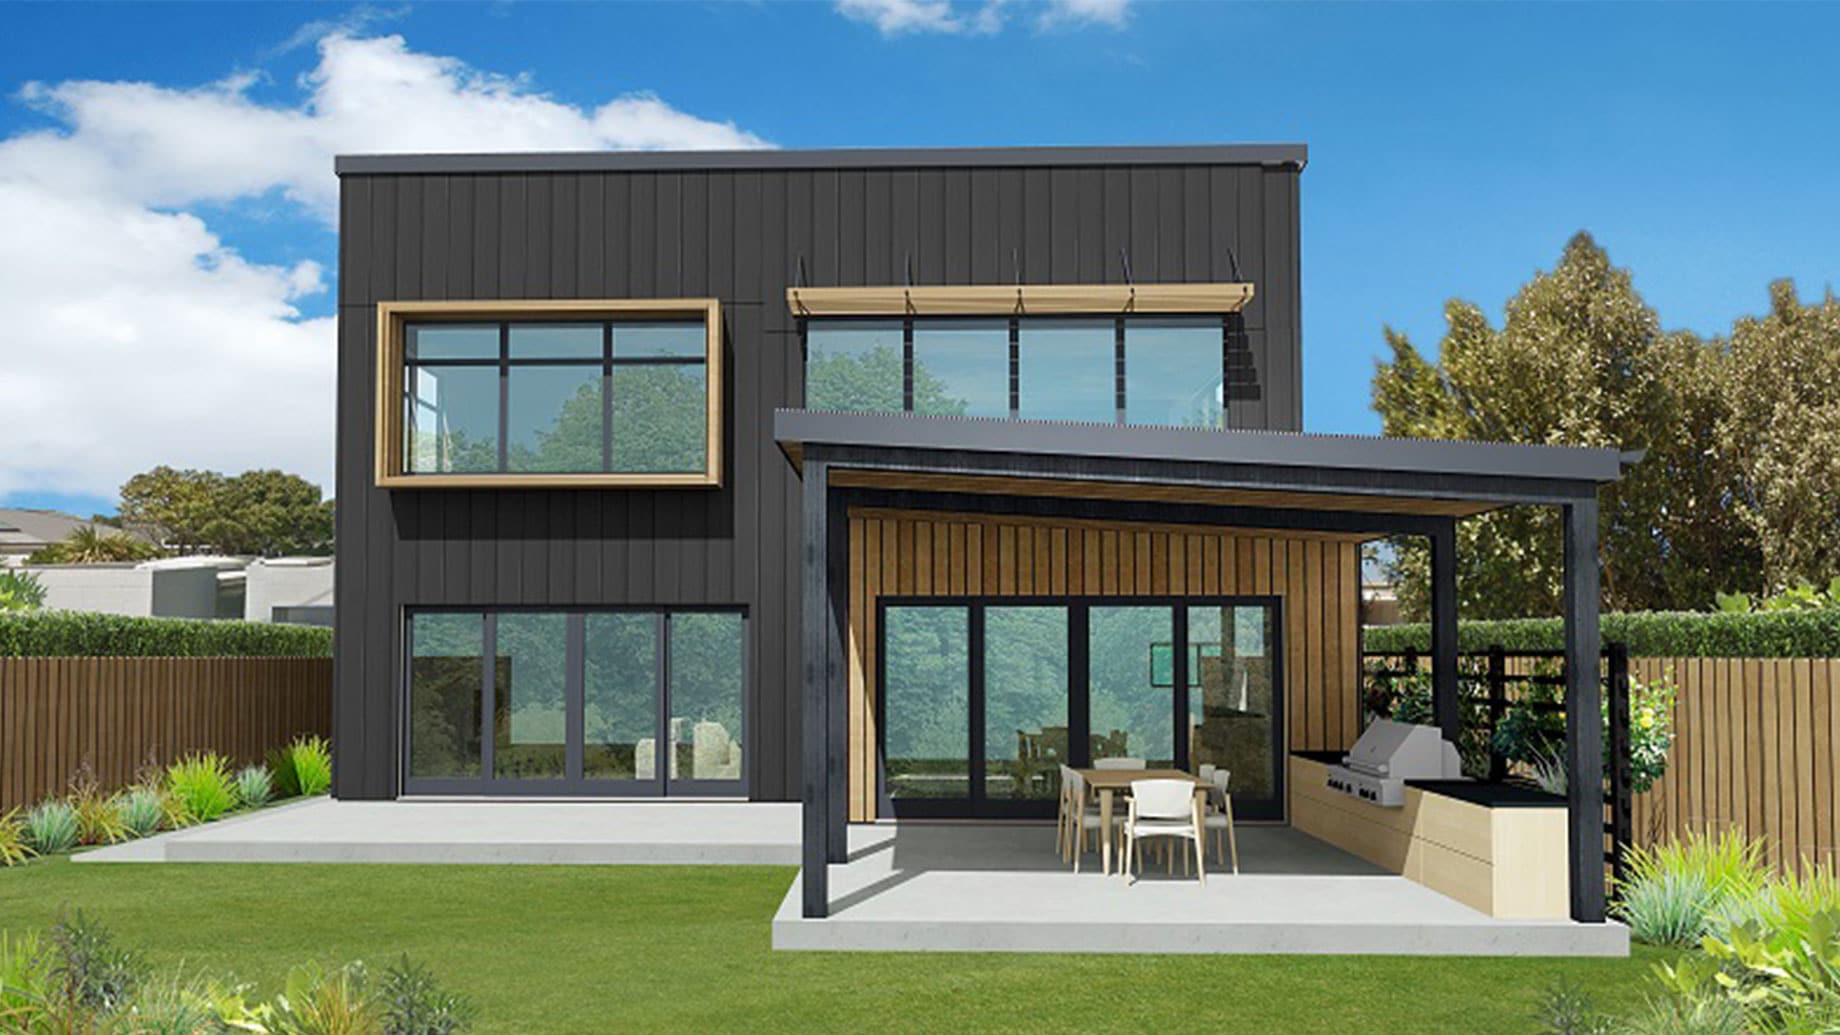 Black and wooden house render